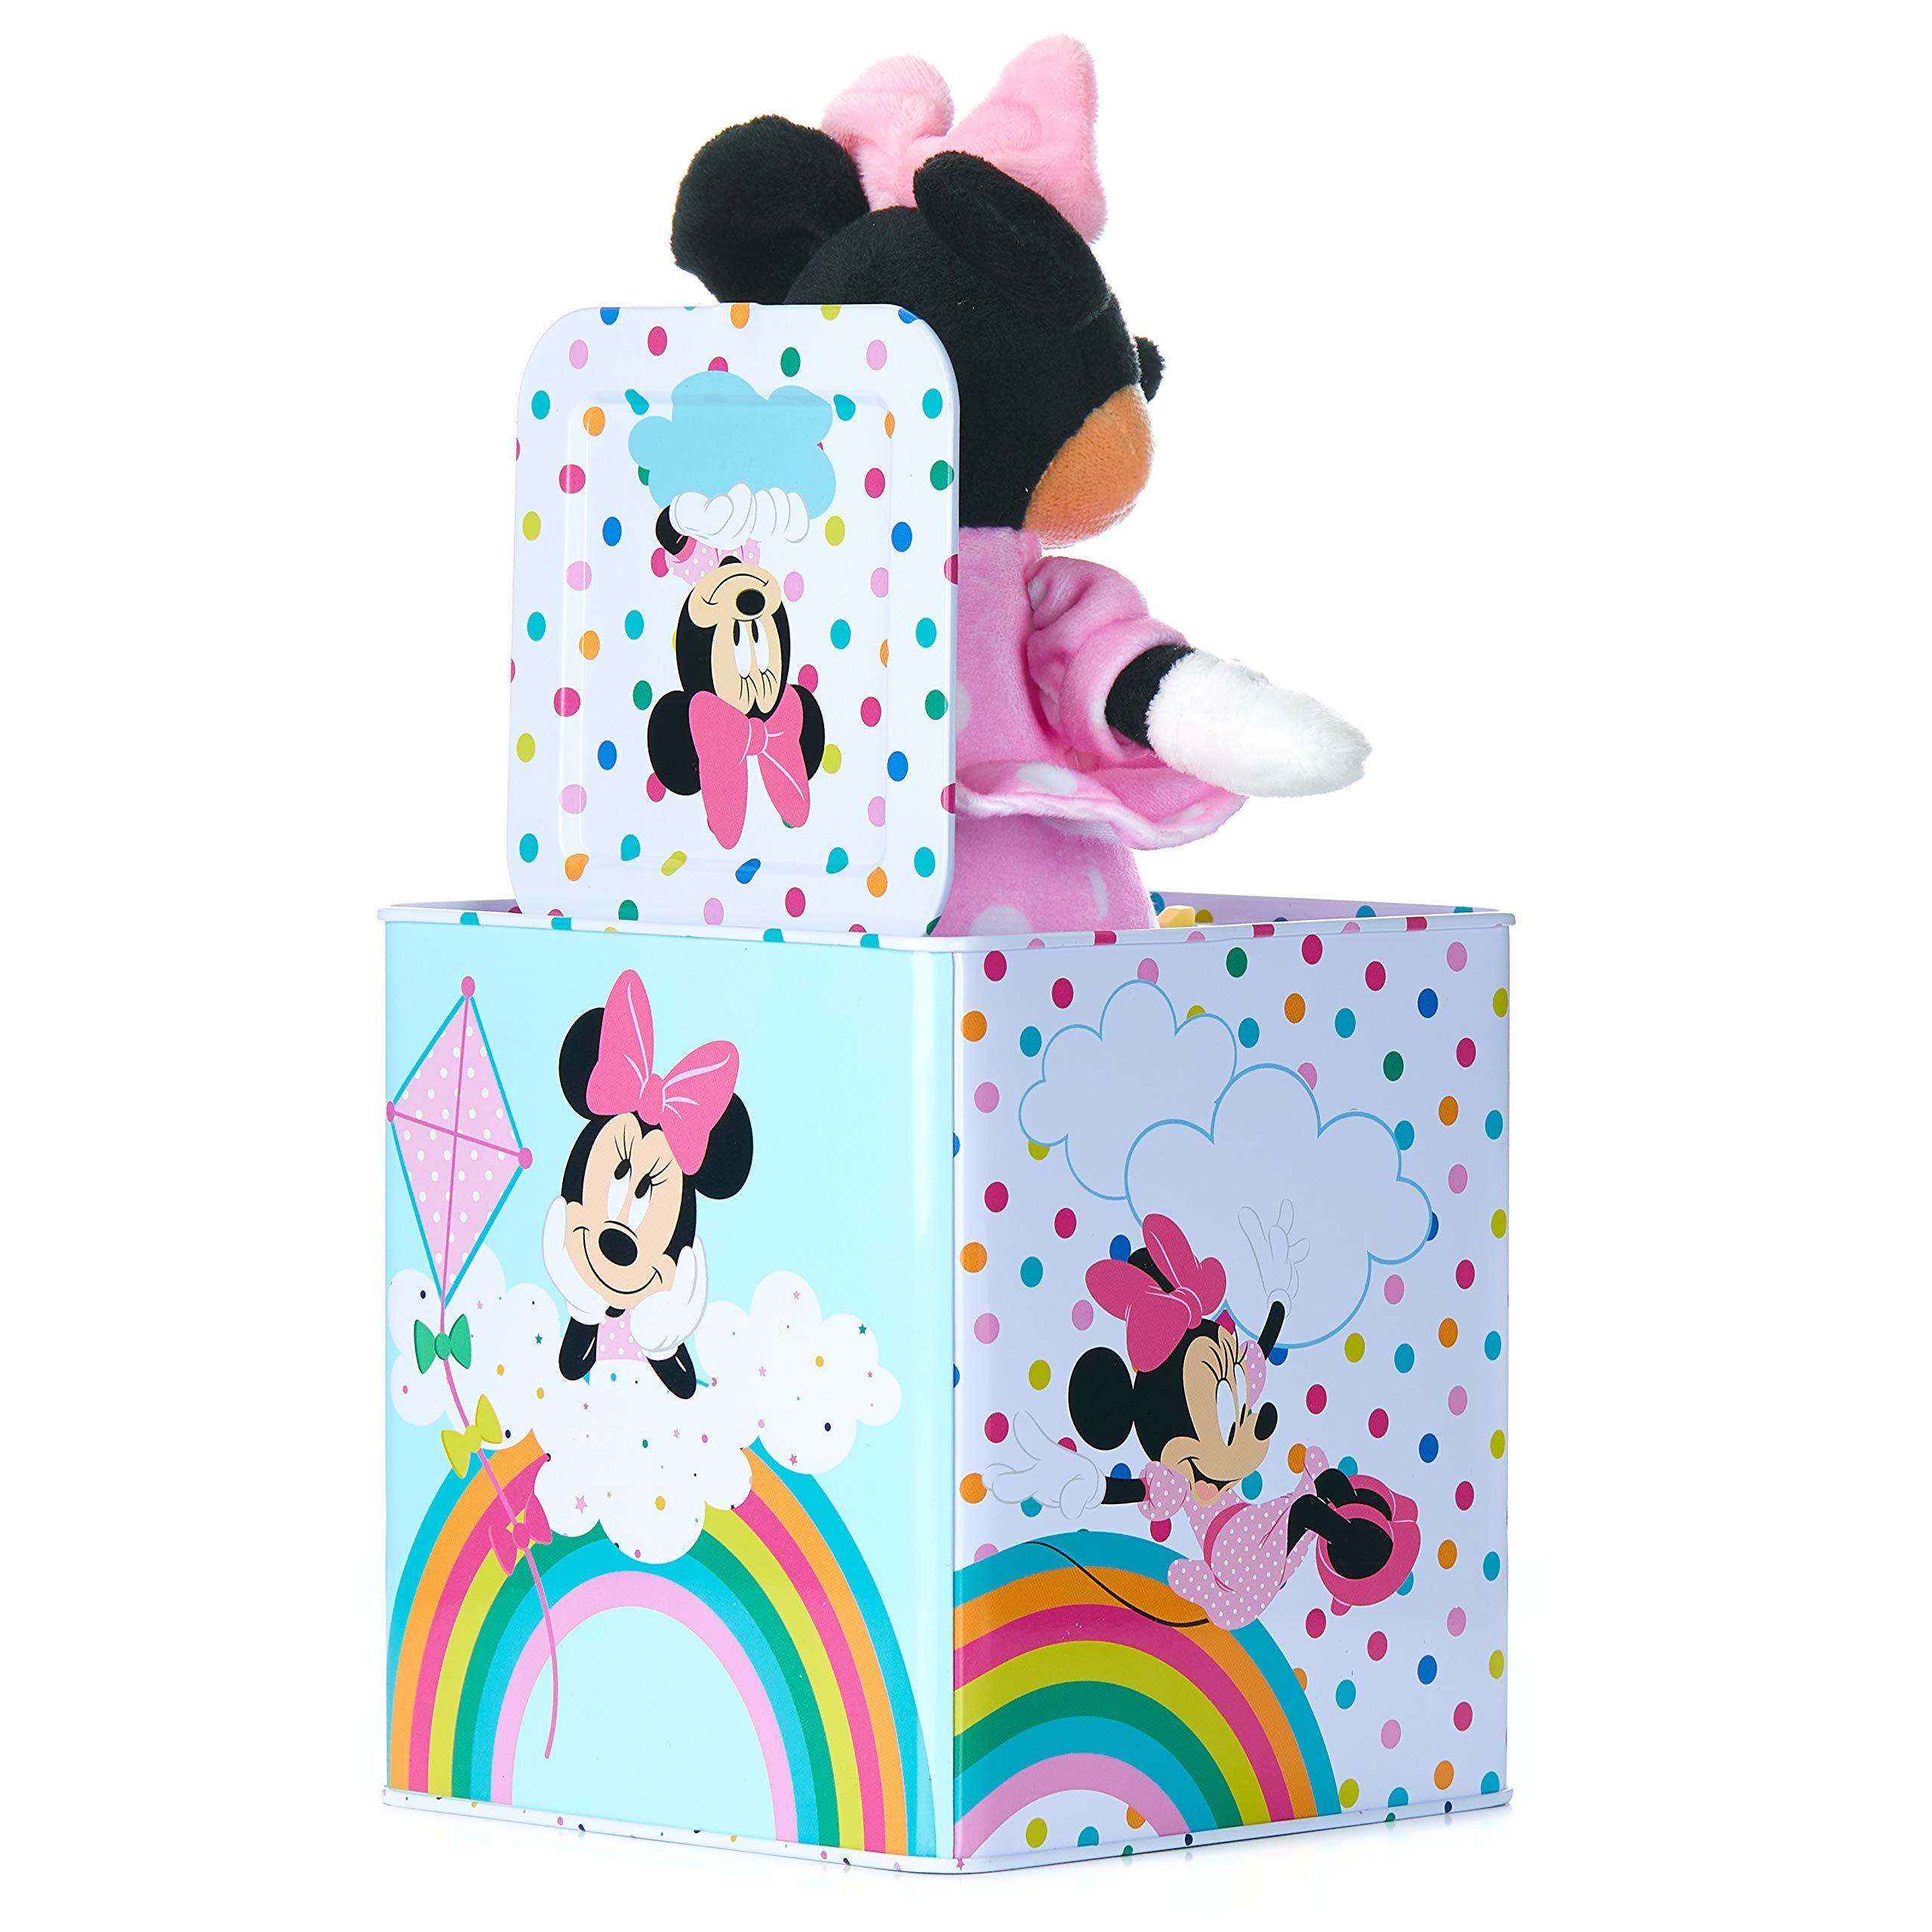 KIDS PREFERRED Disney Baby Minnie Mouse Jack in The Box Musical Toys for Babies and Toddlers, Plays “Somewhere Over The Rainbow” Minnie Springs Out from A Colorful Box, Pink